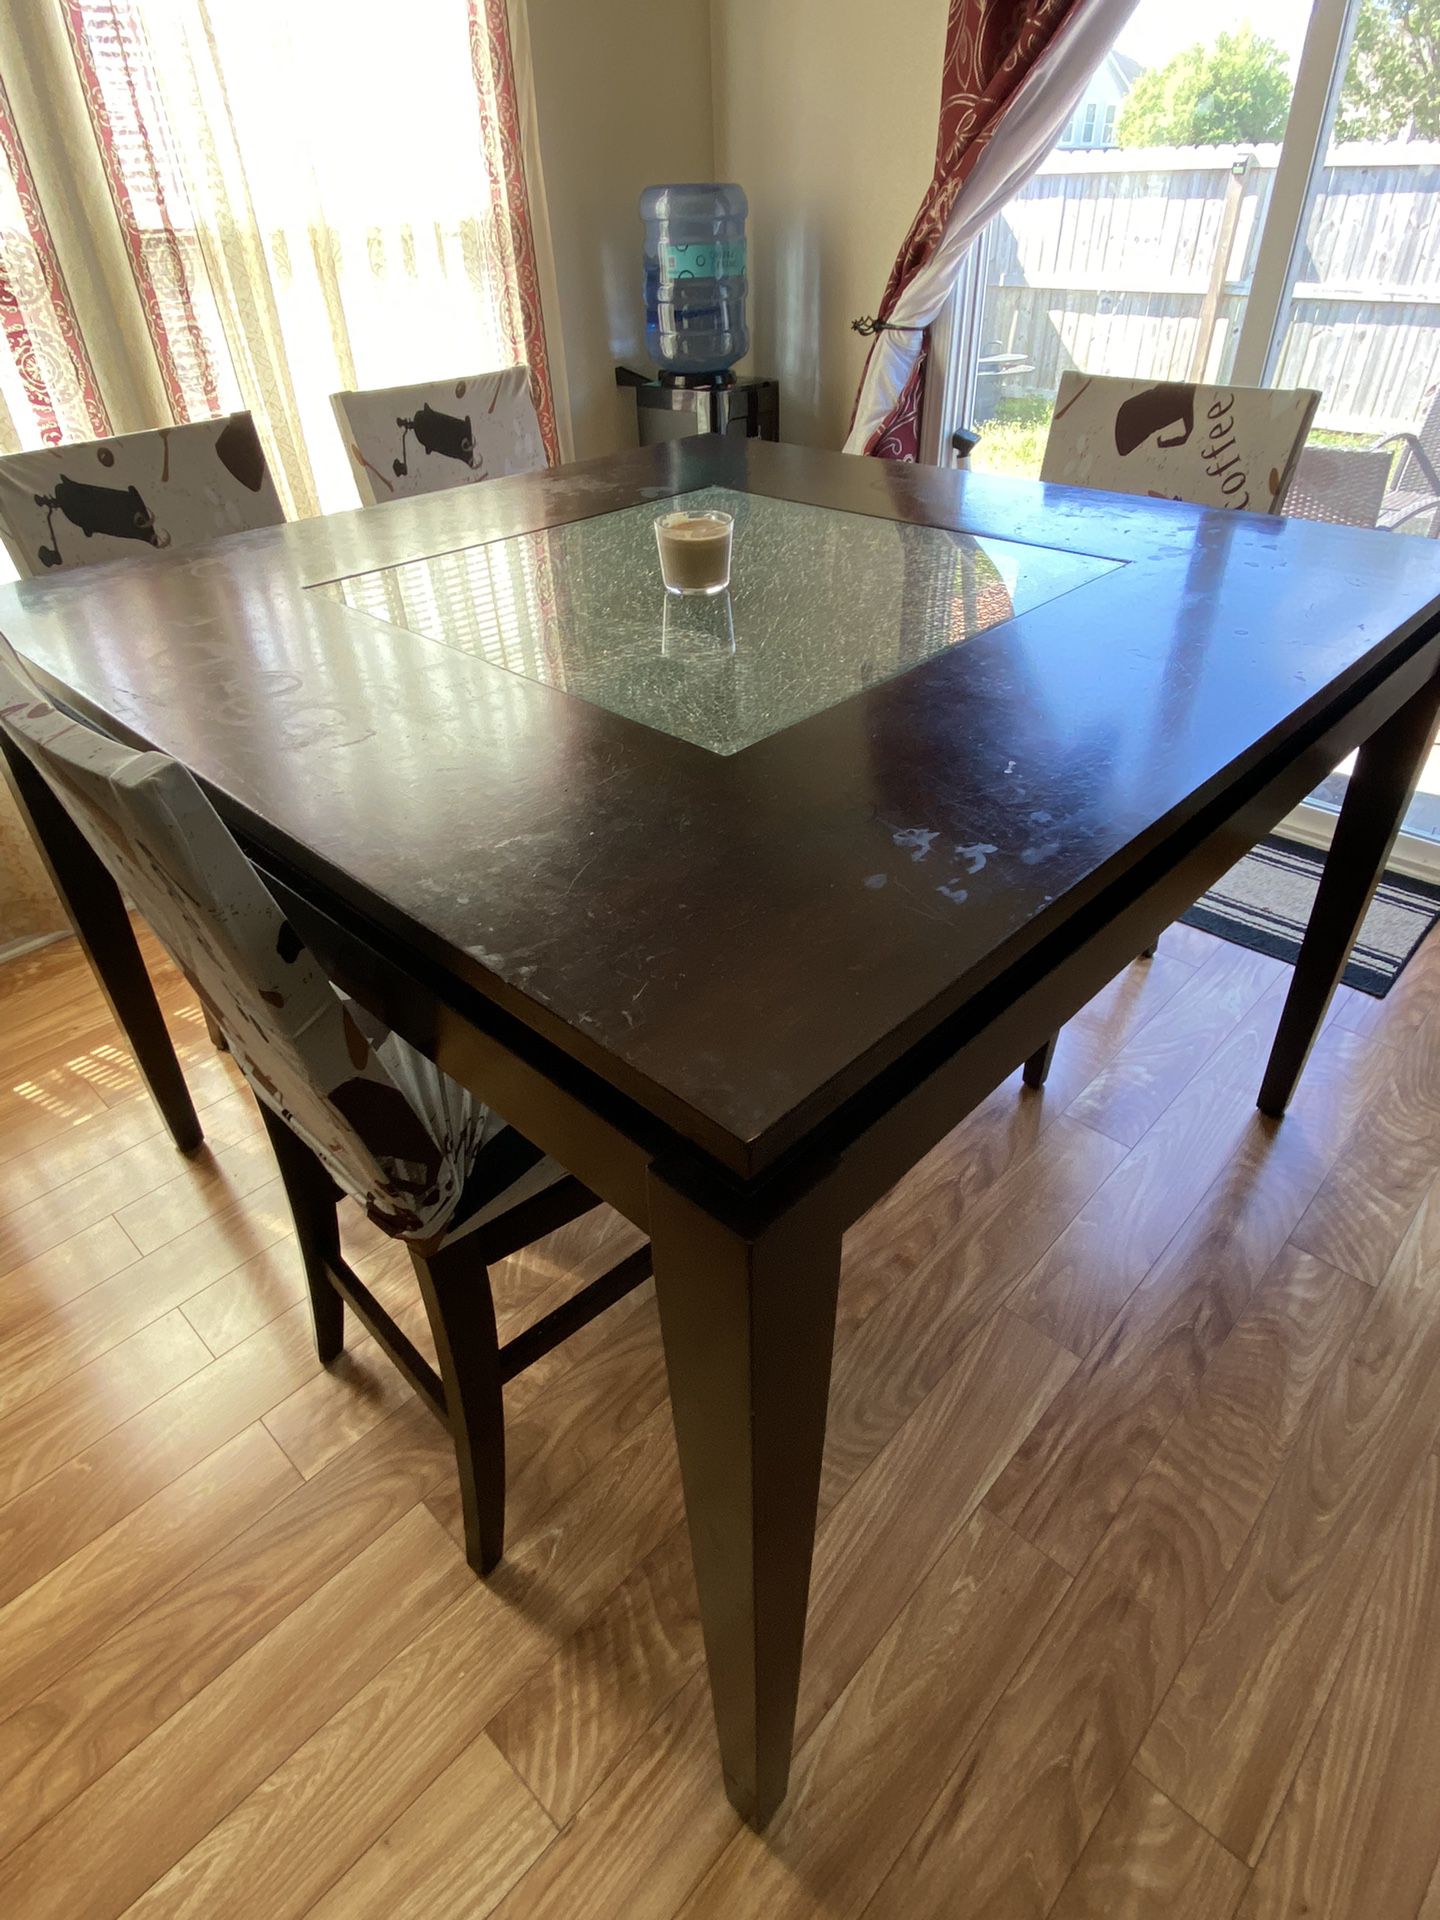 For Sale Dining Table Set